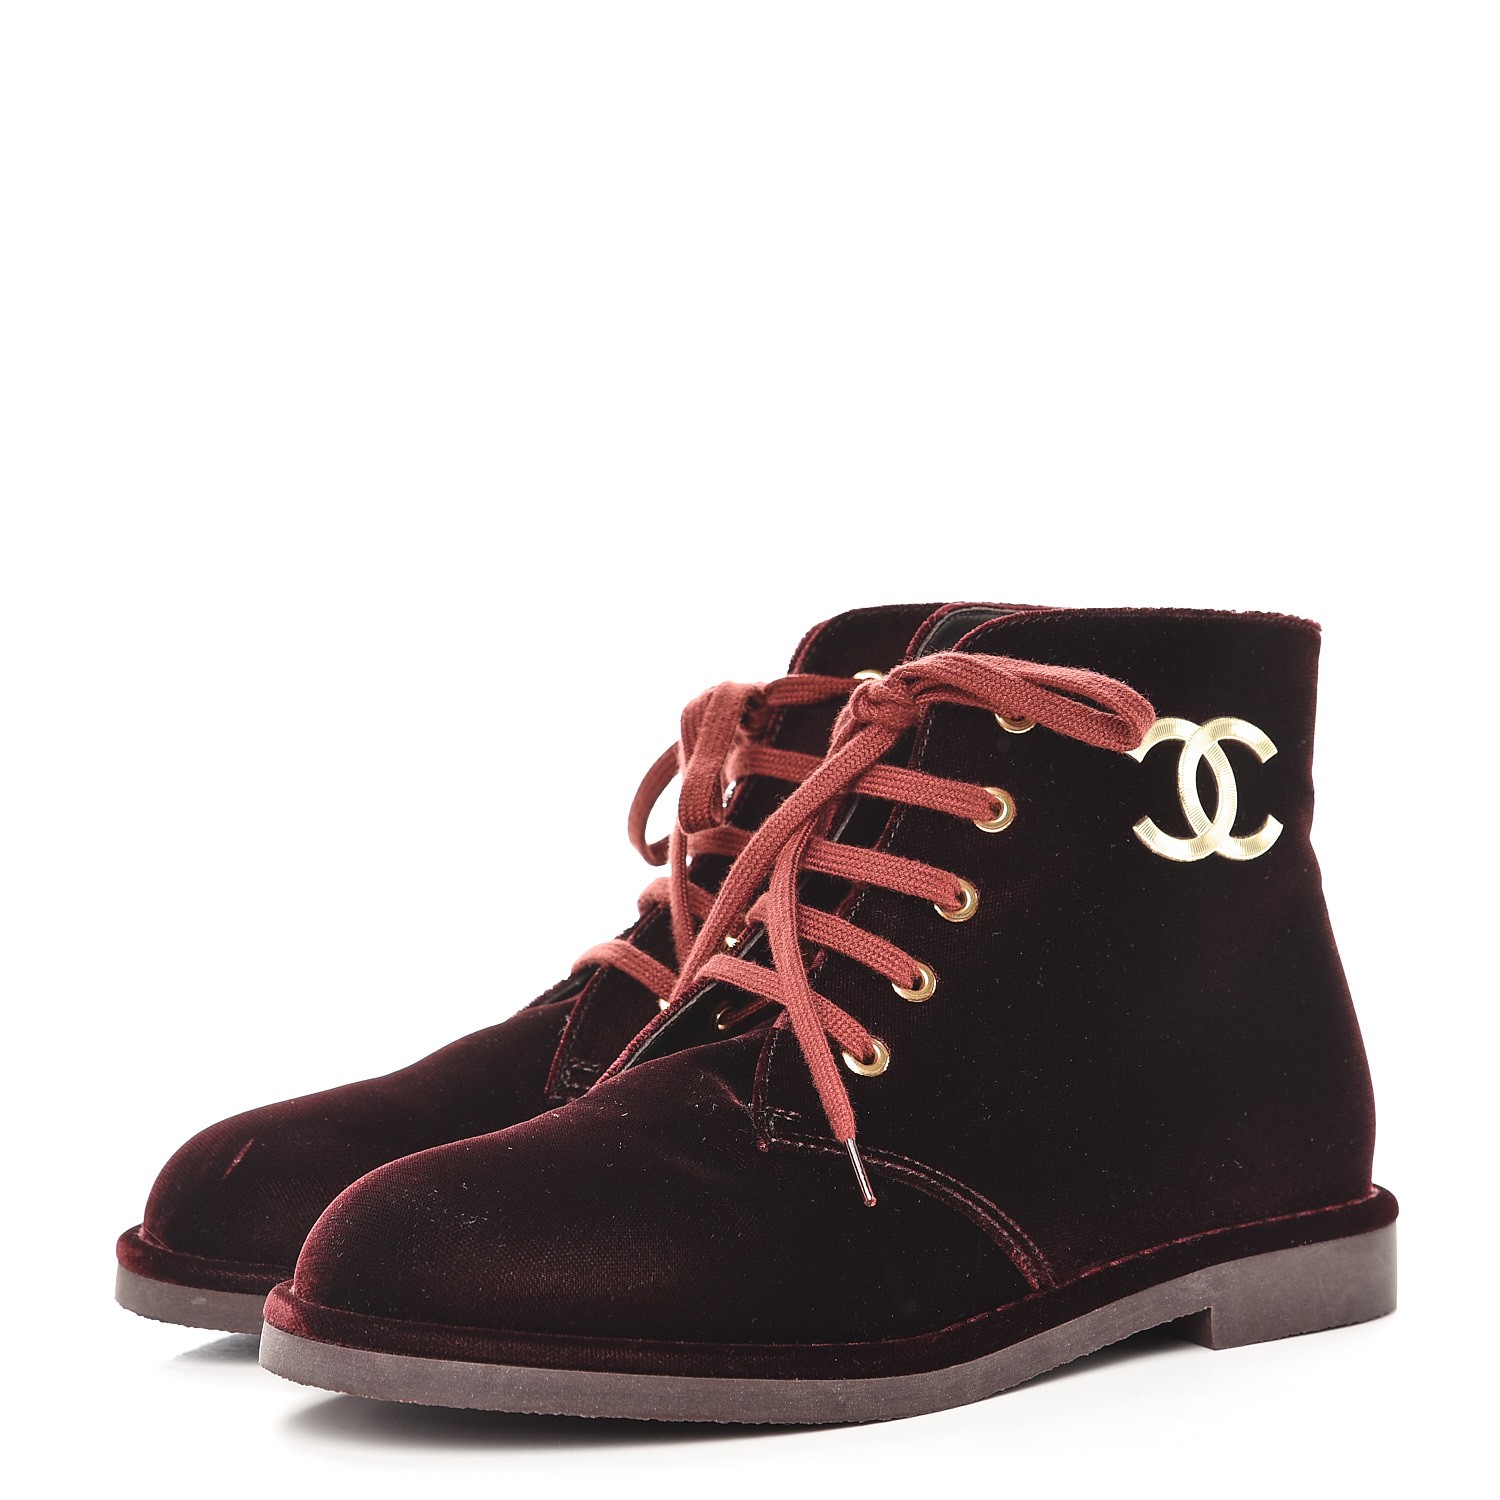 chanel burgundy boots